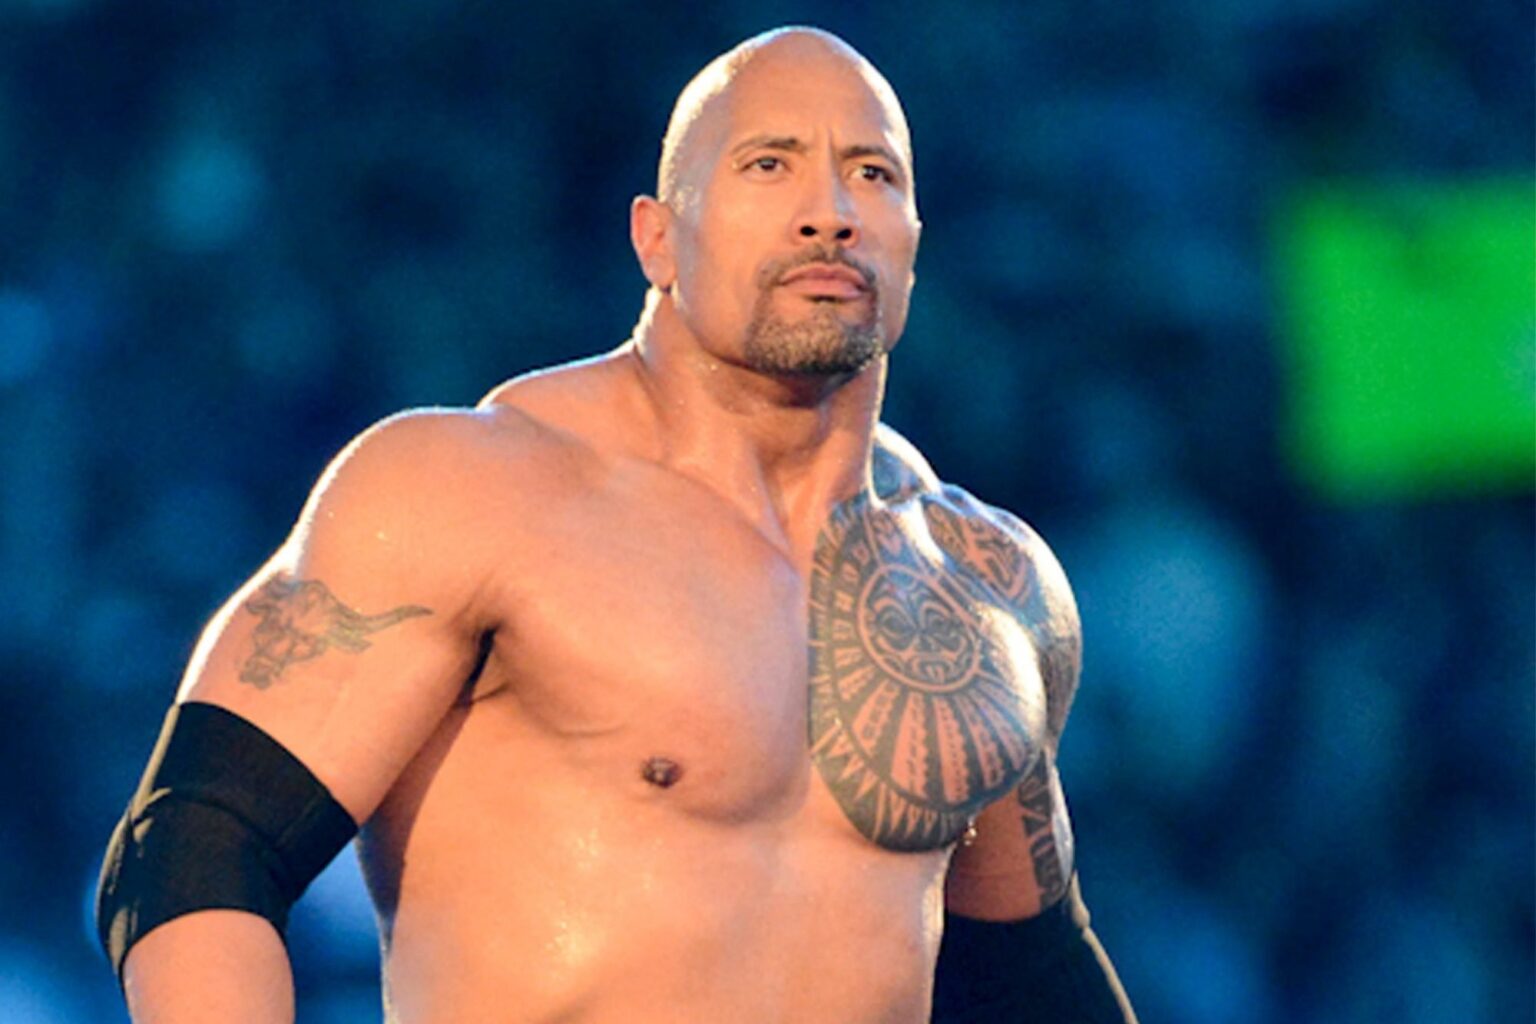 Dwayne Johnson (The Rock) Net Worth, Wife, Age, Height & Daughter